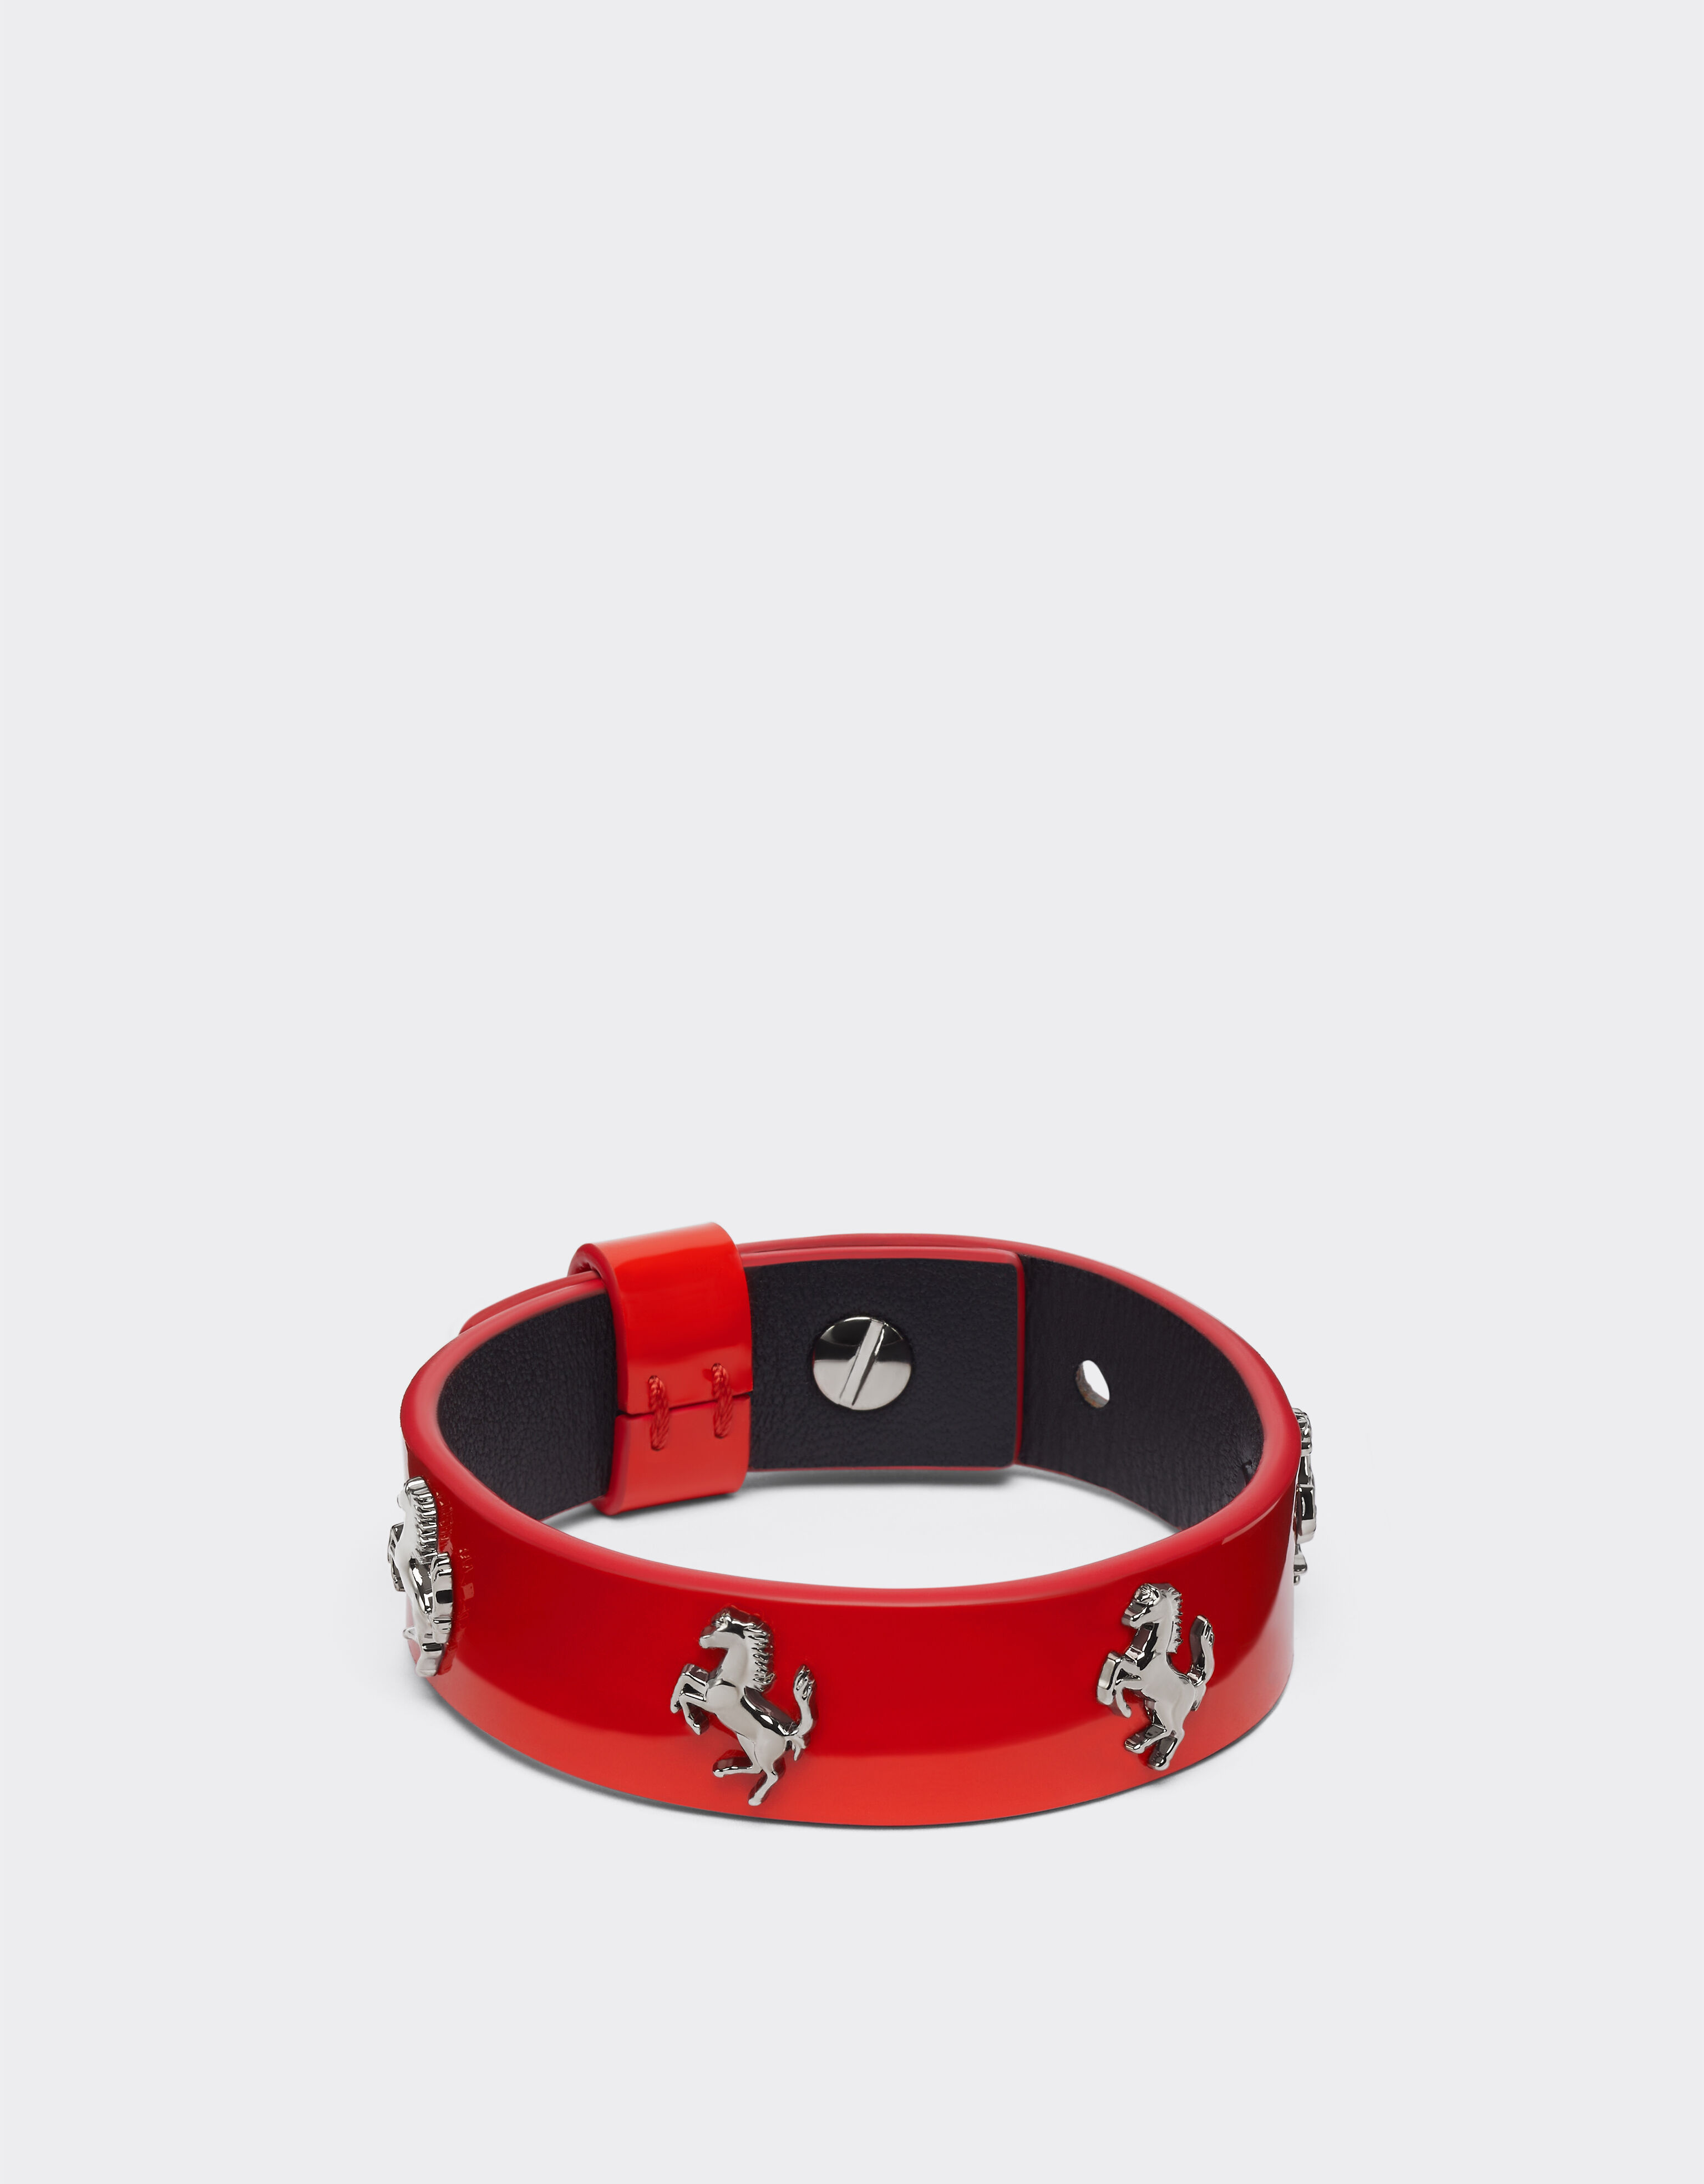 Ferrari Bracelet in red patent leather with studs Charcoal 20014f